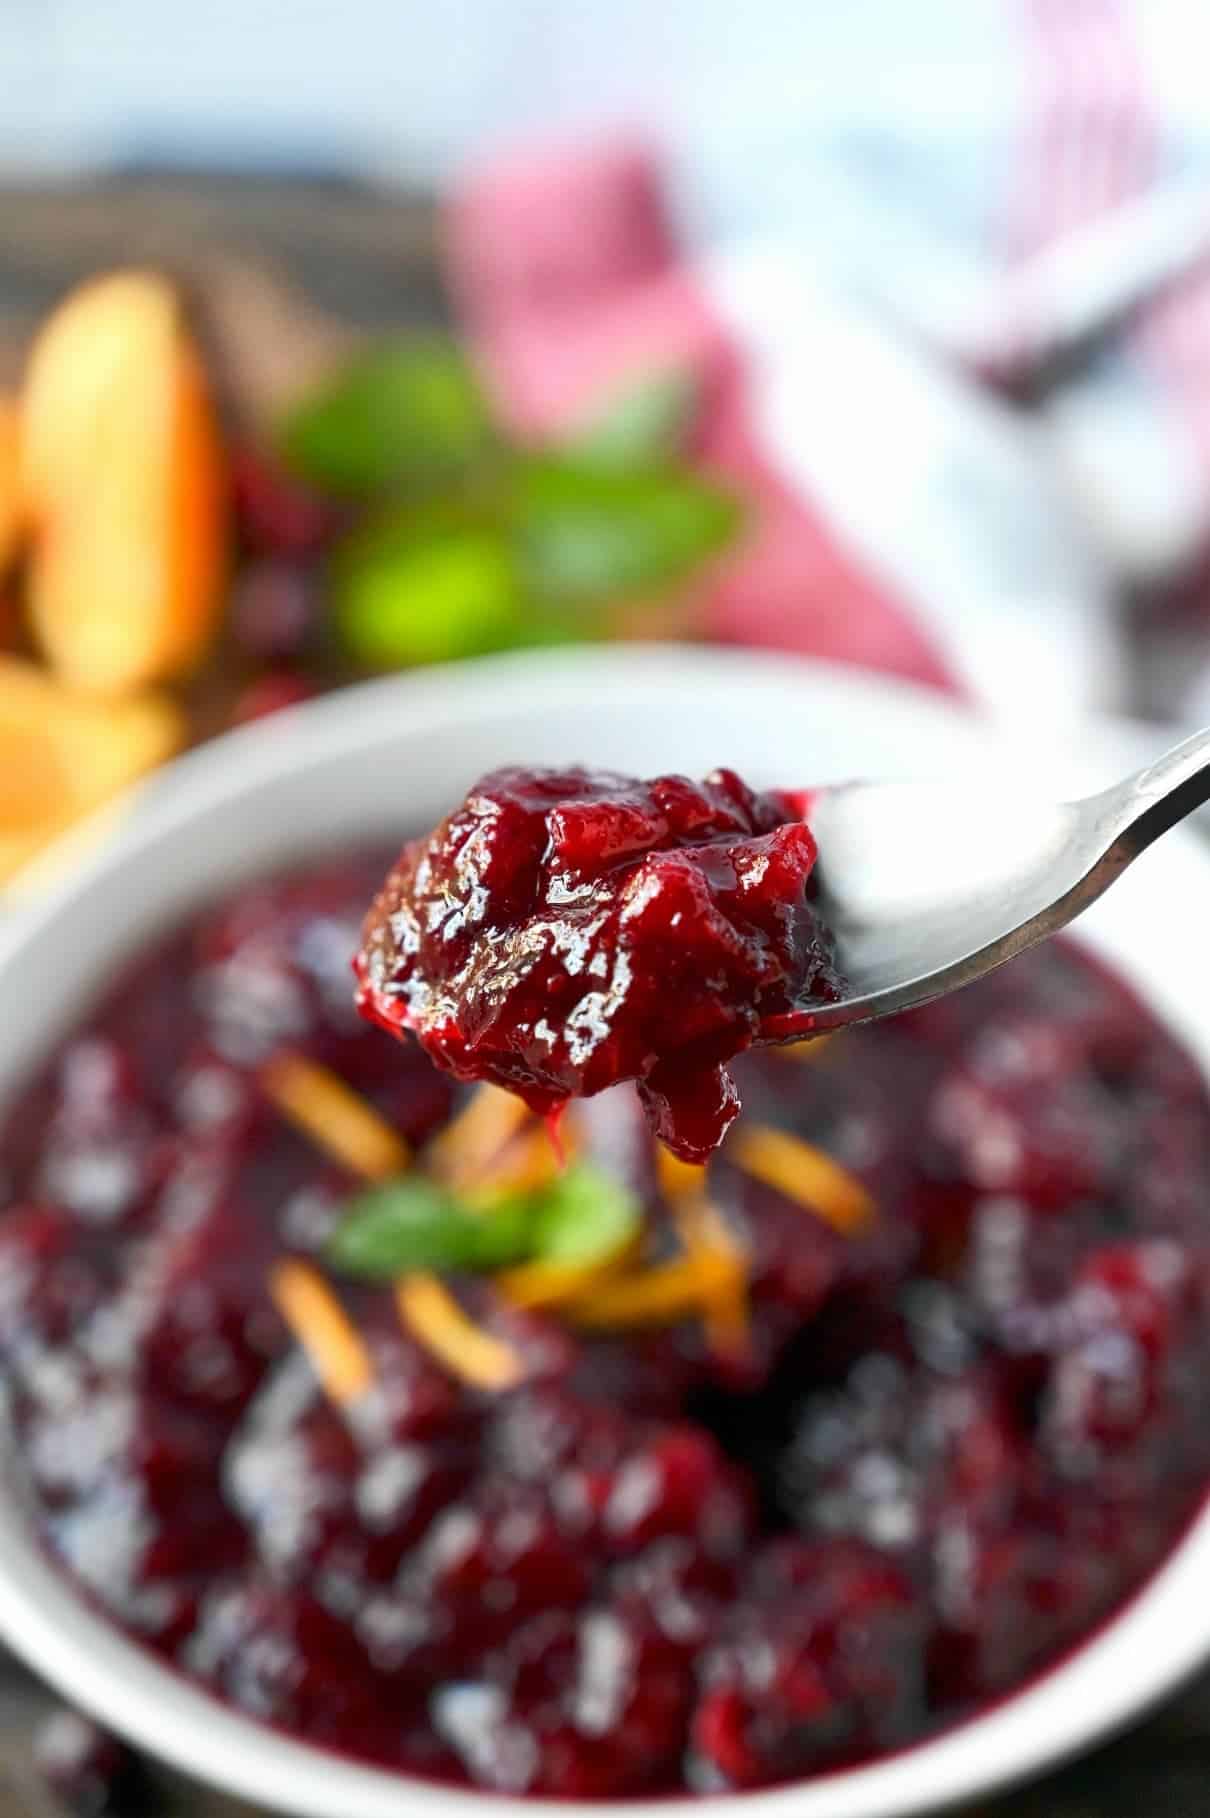 Cranberry sauce bite being picked up onto a fork.